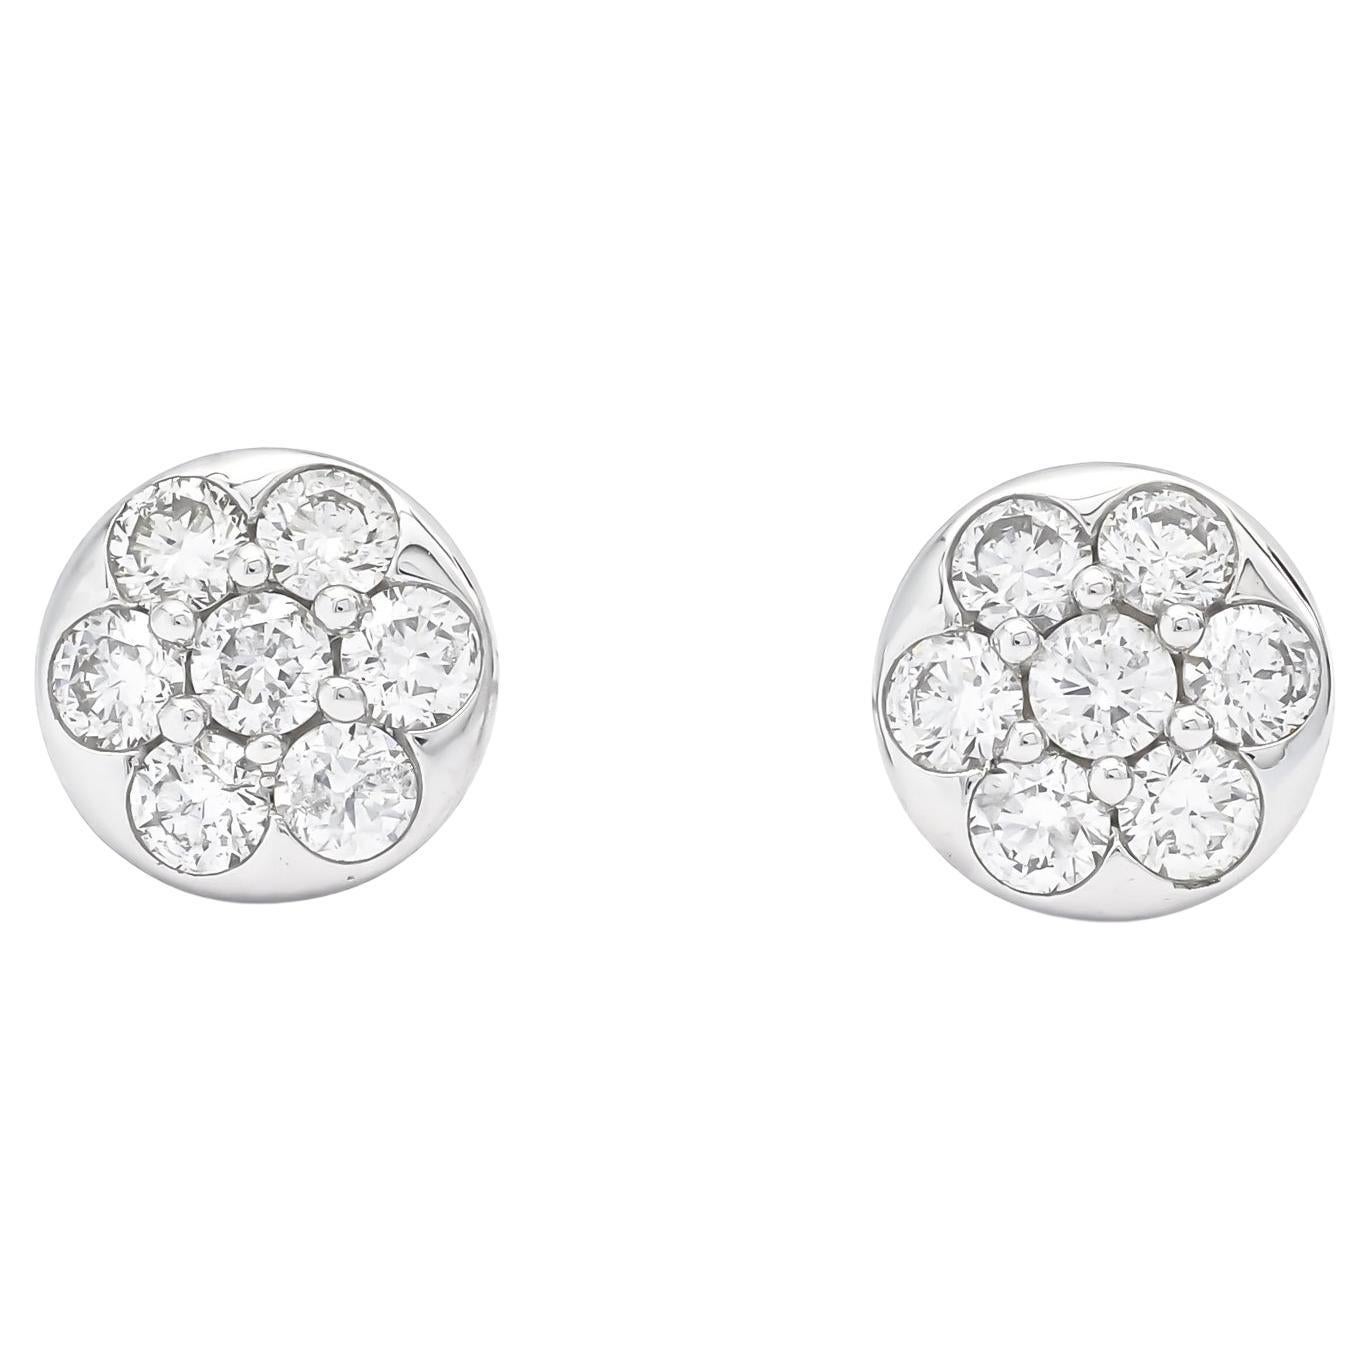  Natural Diamonds 0.55 cts 18KT White Gold Cluster Classic Stud Earrings E05172